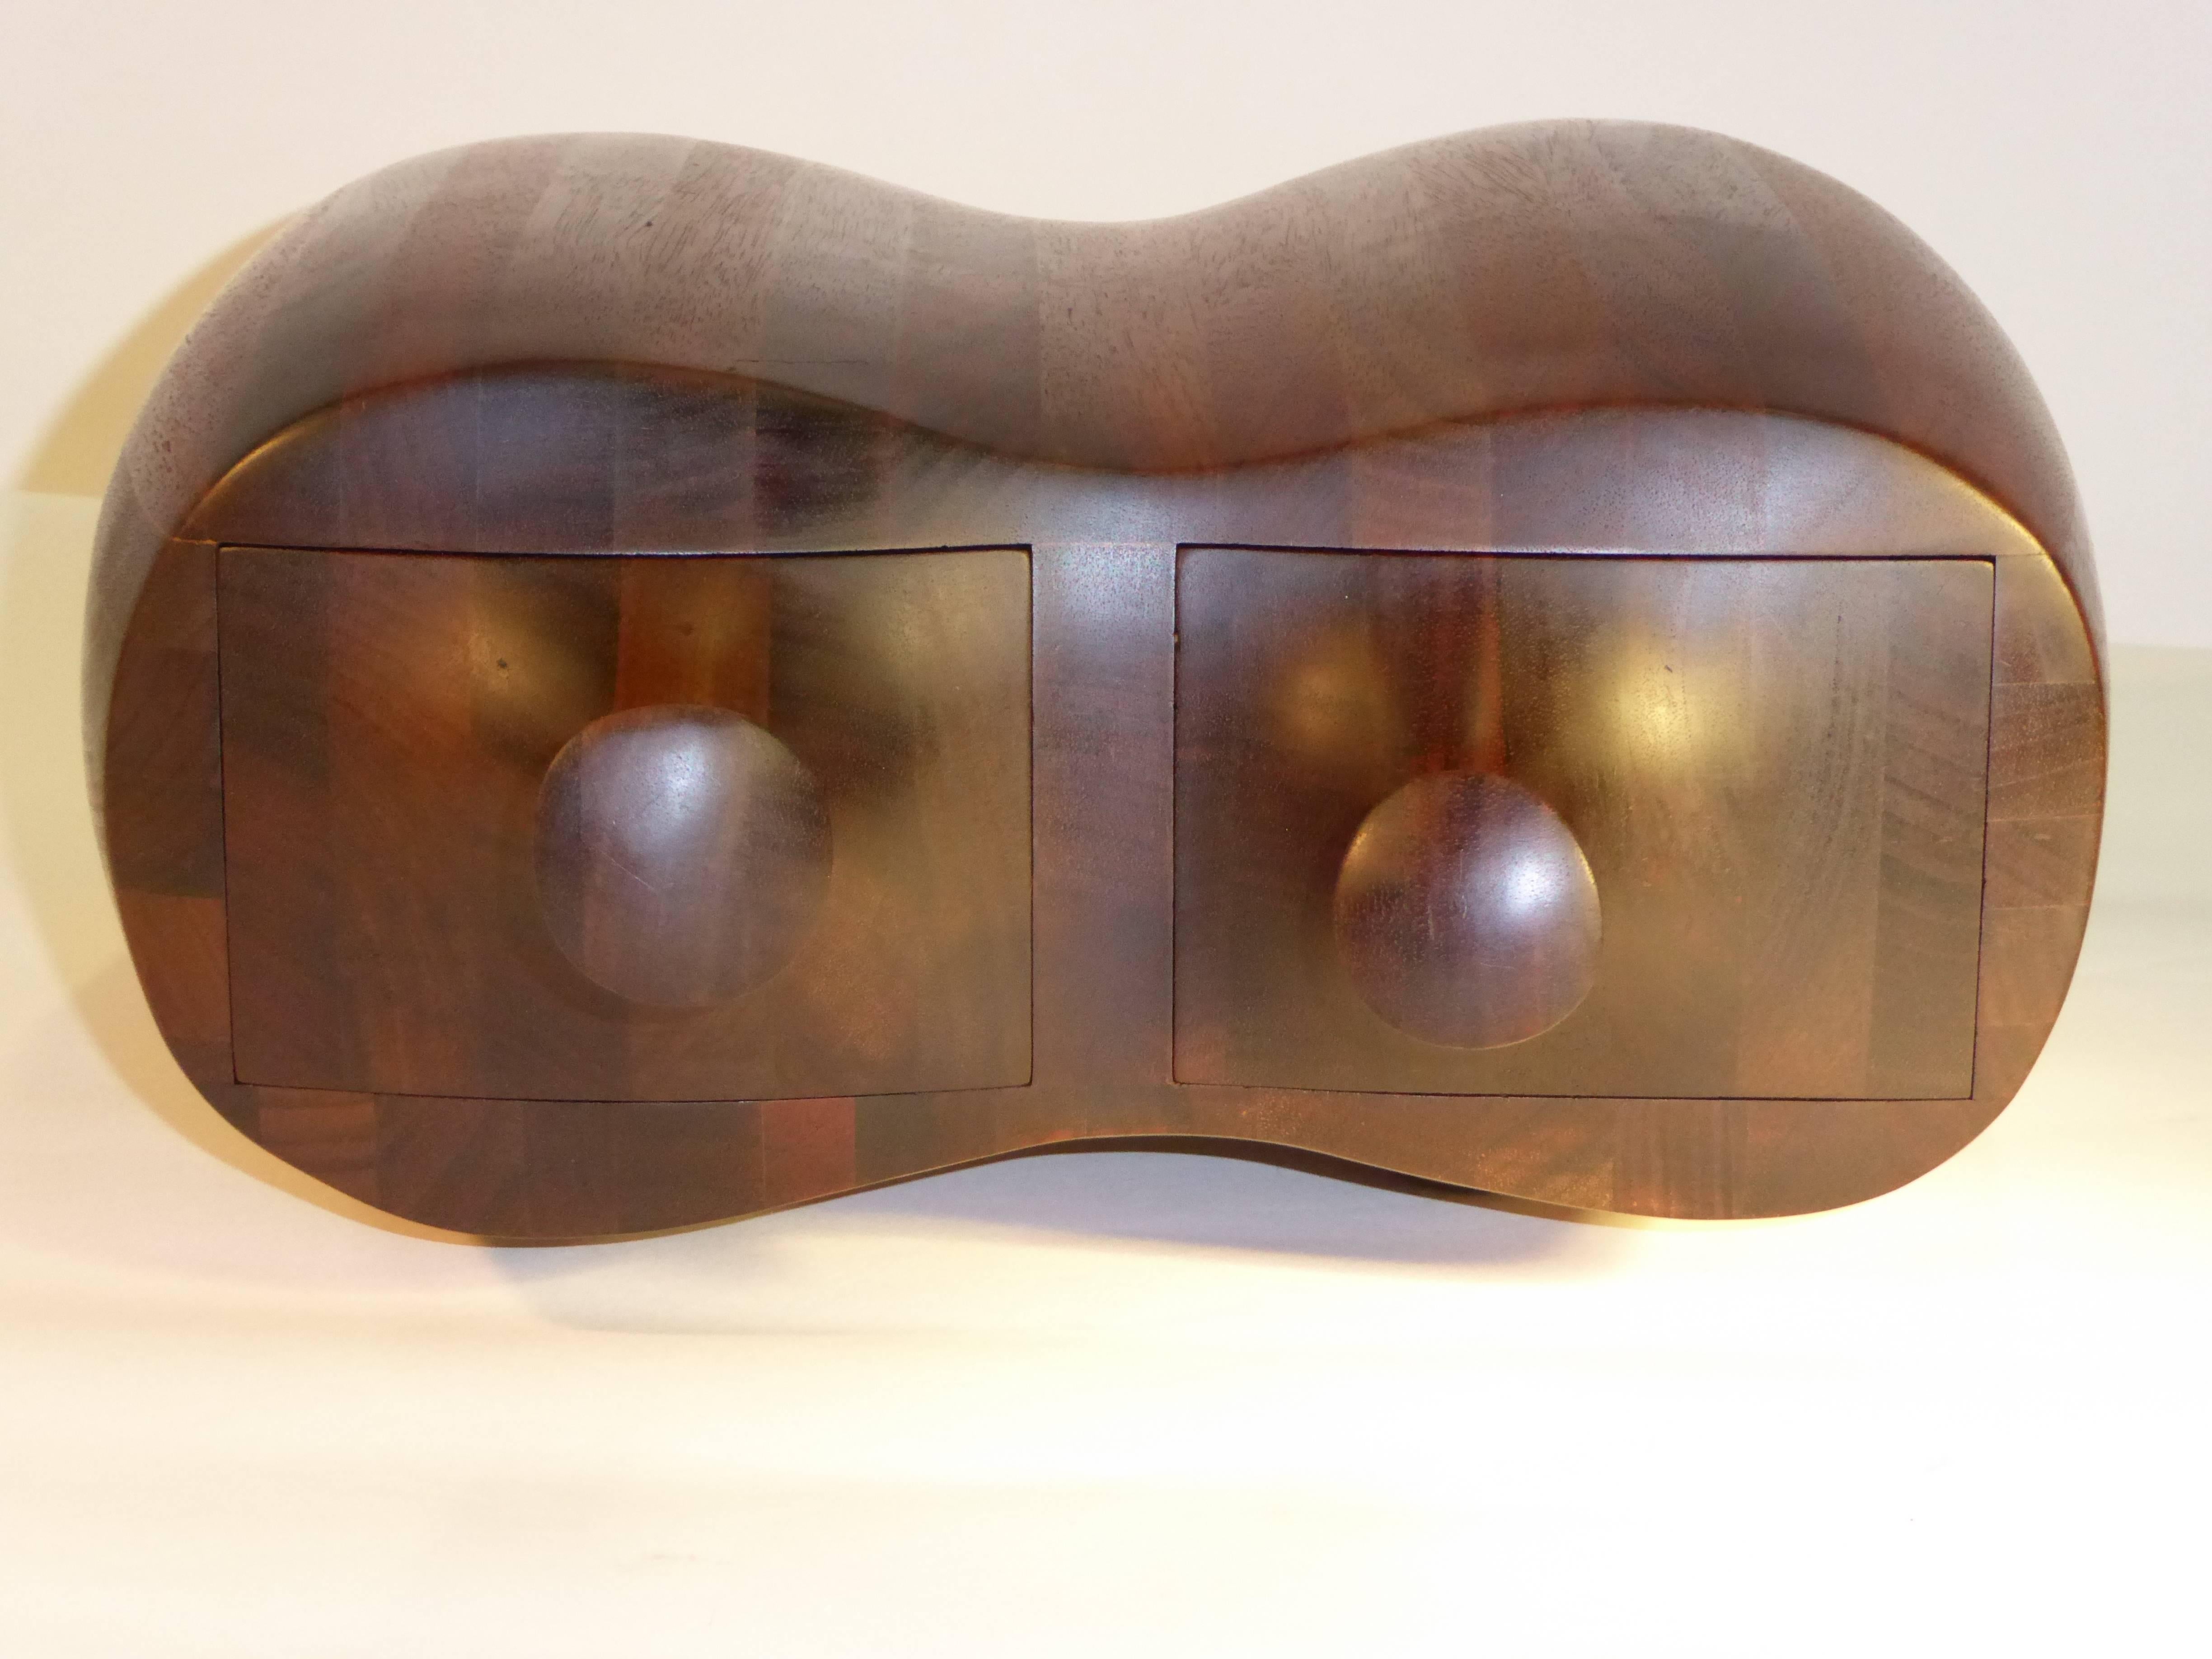 Hand-Crafted 1970 Unique Daniel Loomis Valenza Sculpted Organic Table Top Box with Drawers